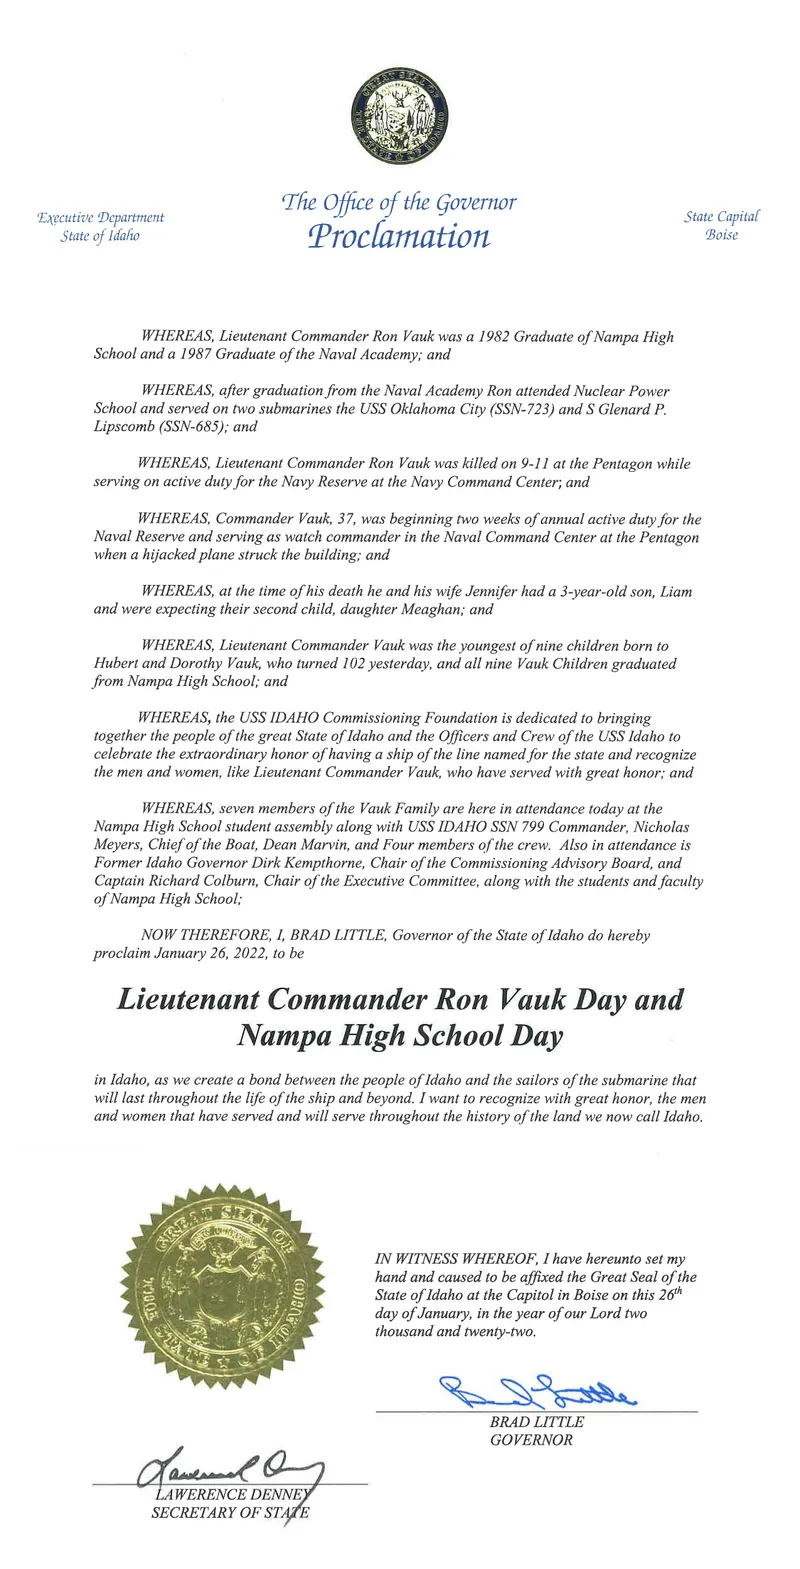 Proclamation from Idaho Governor, Brad Little